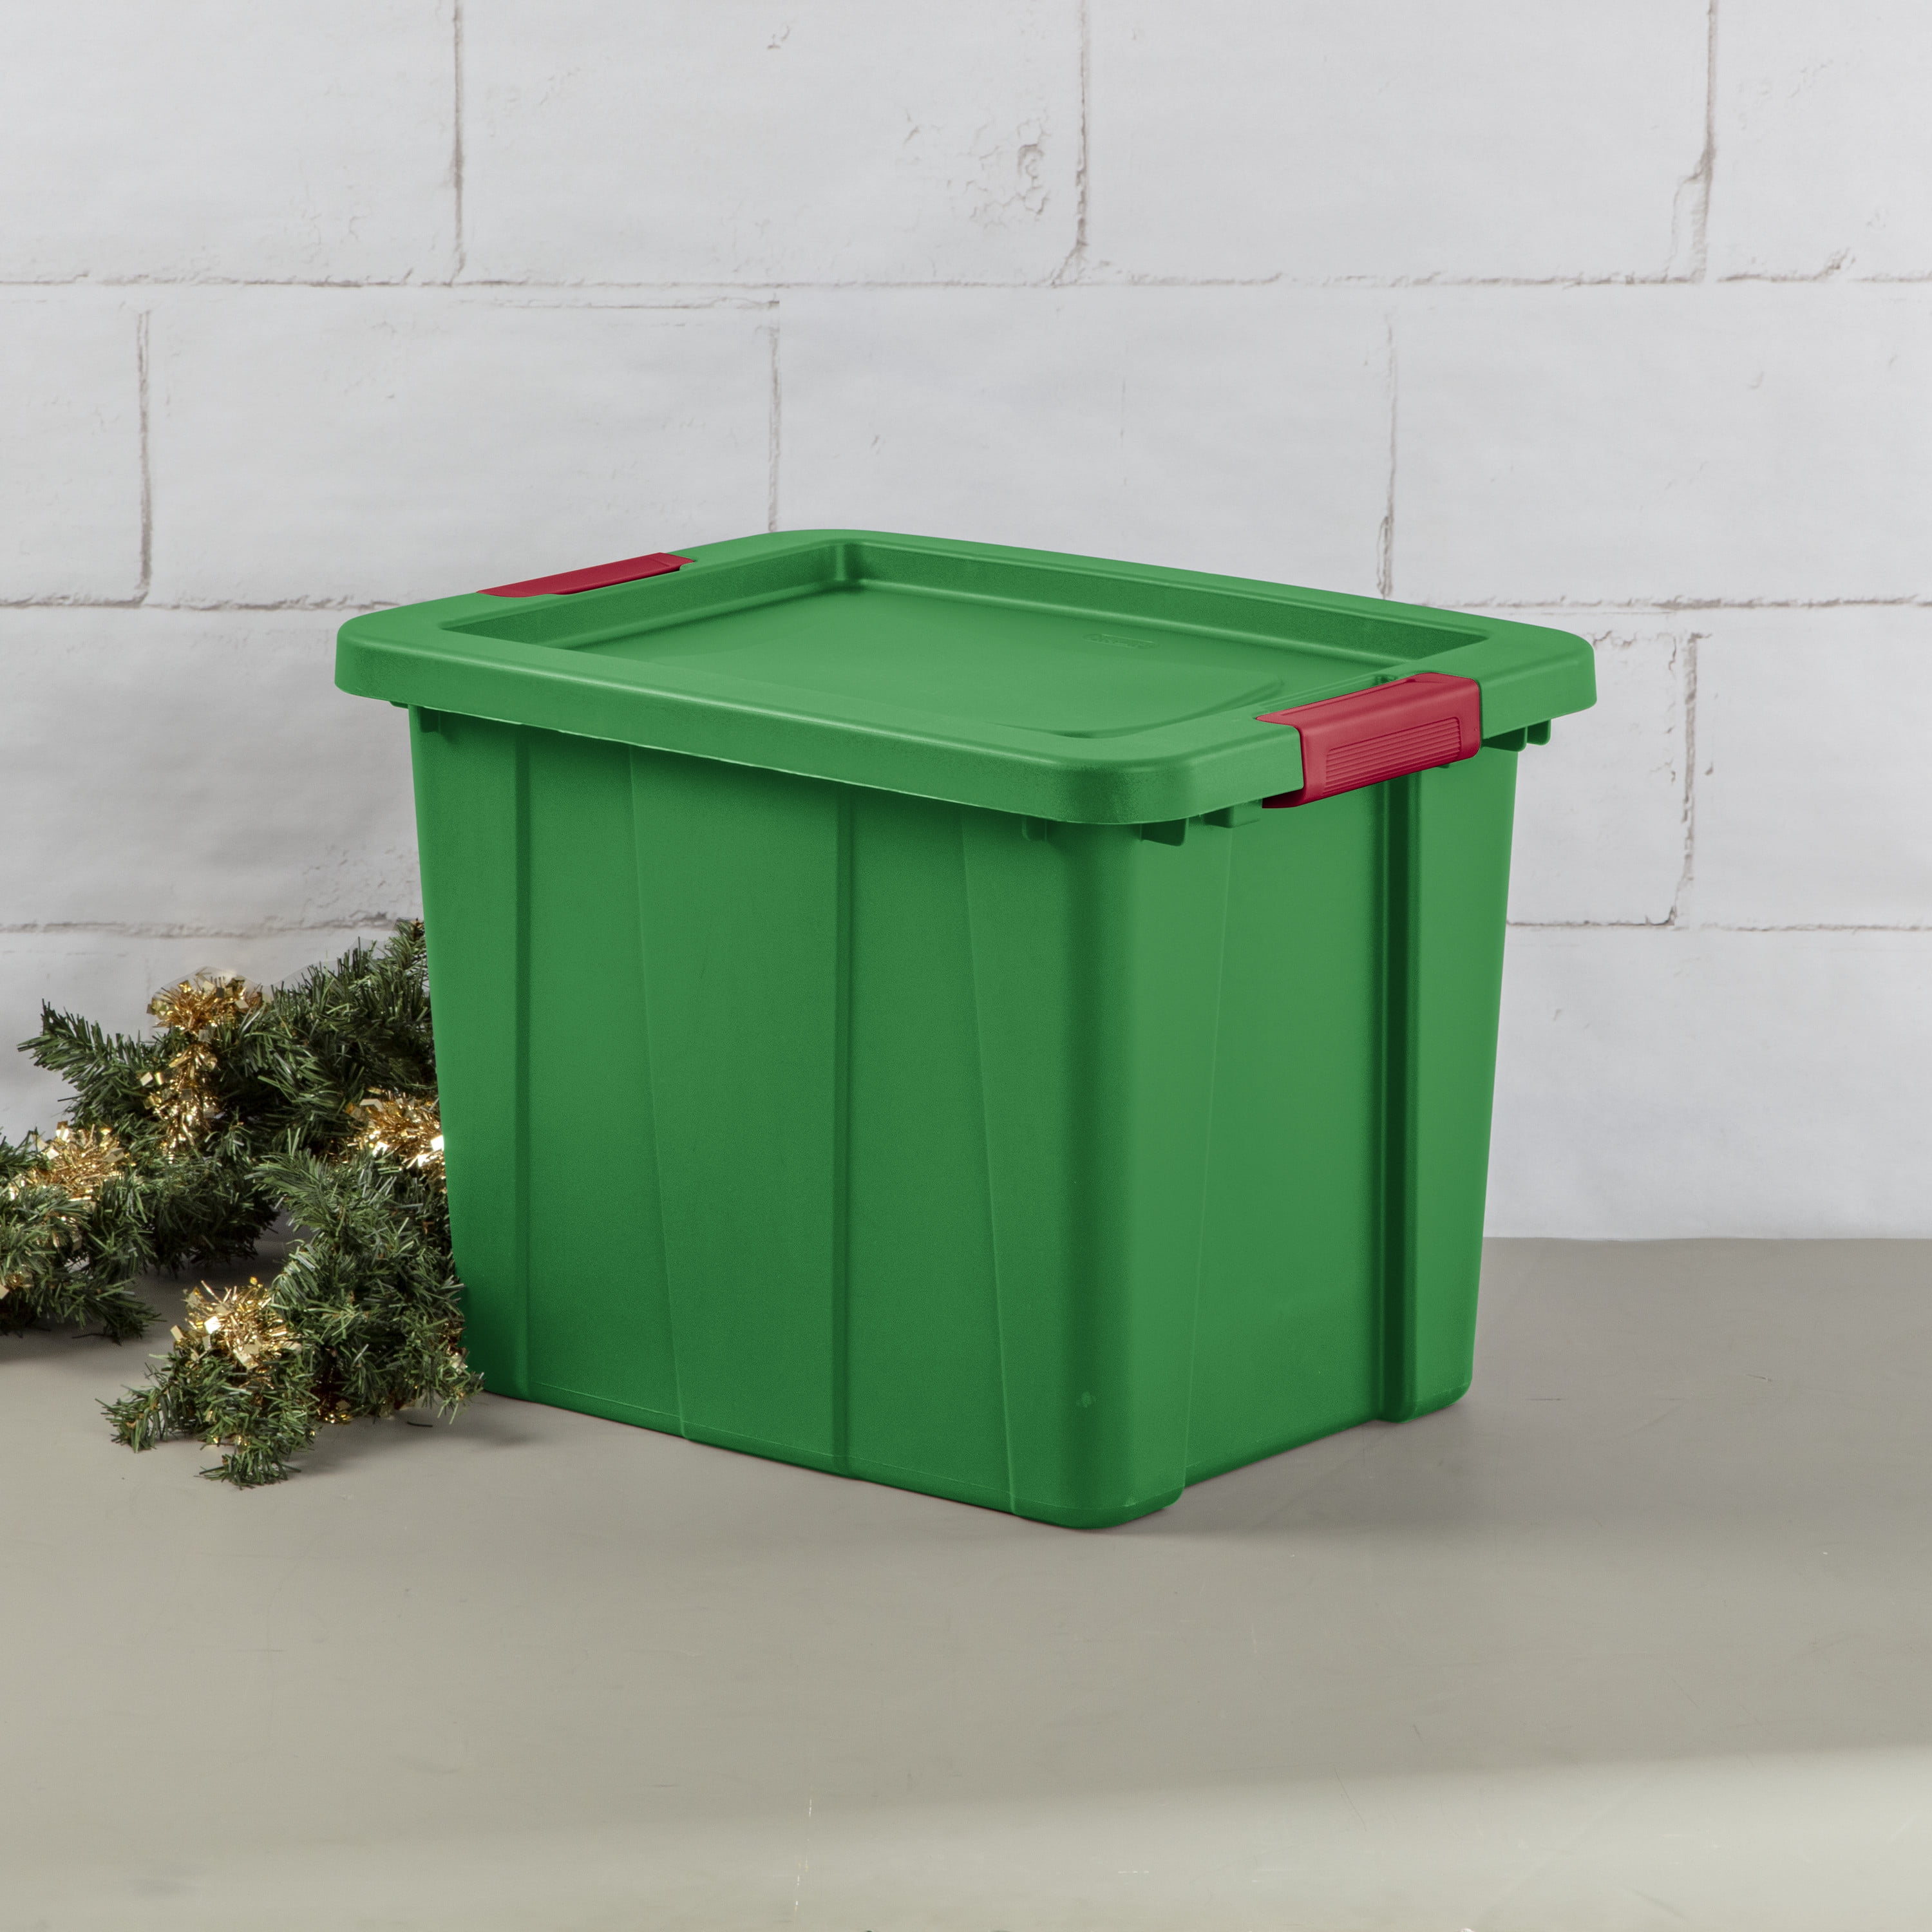 Hefty 18 gal Plastic Holiday Latched Storage Tote, Green 